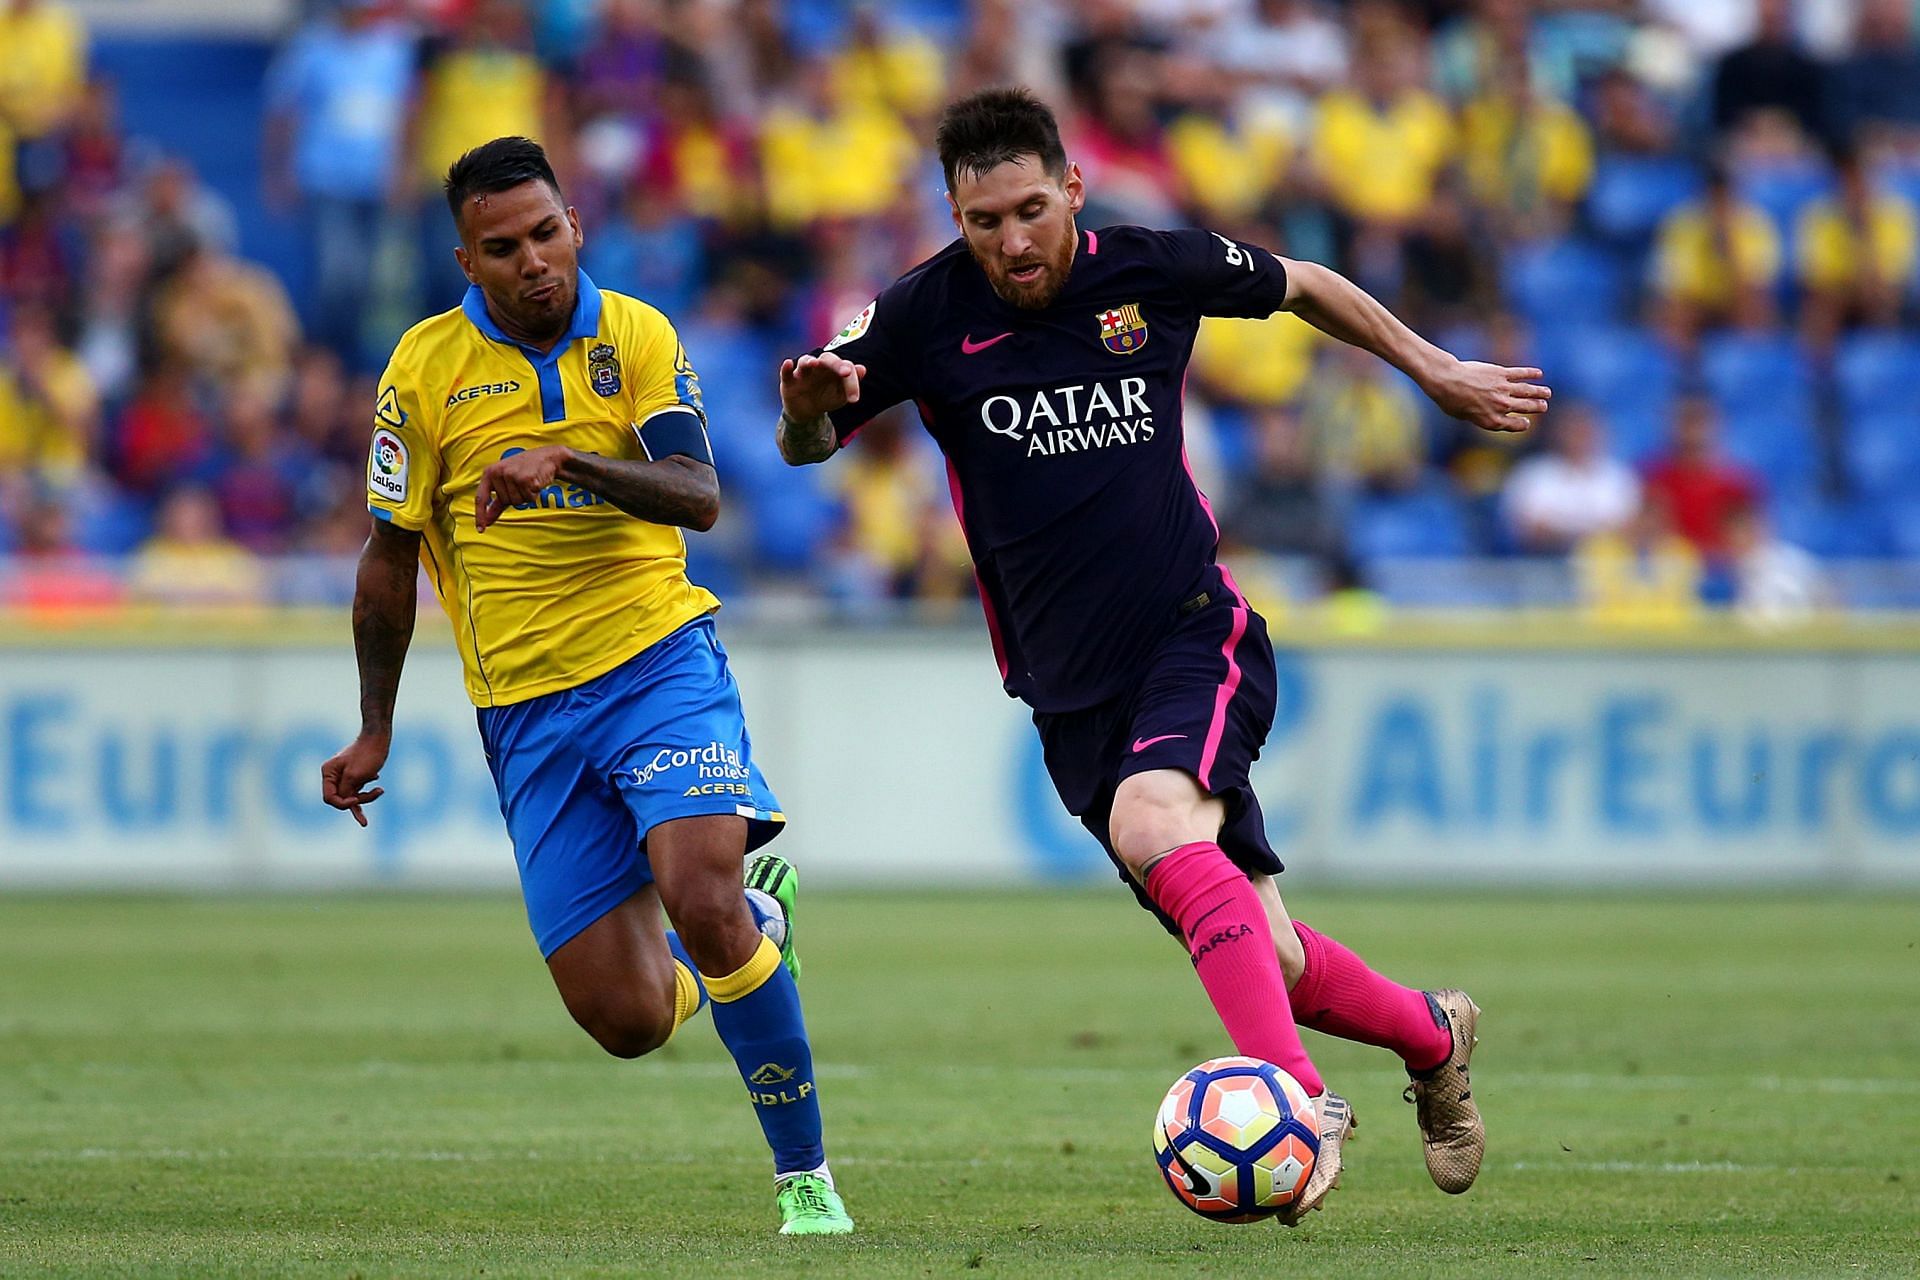 Viera will be a huge miss for Las Palmas